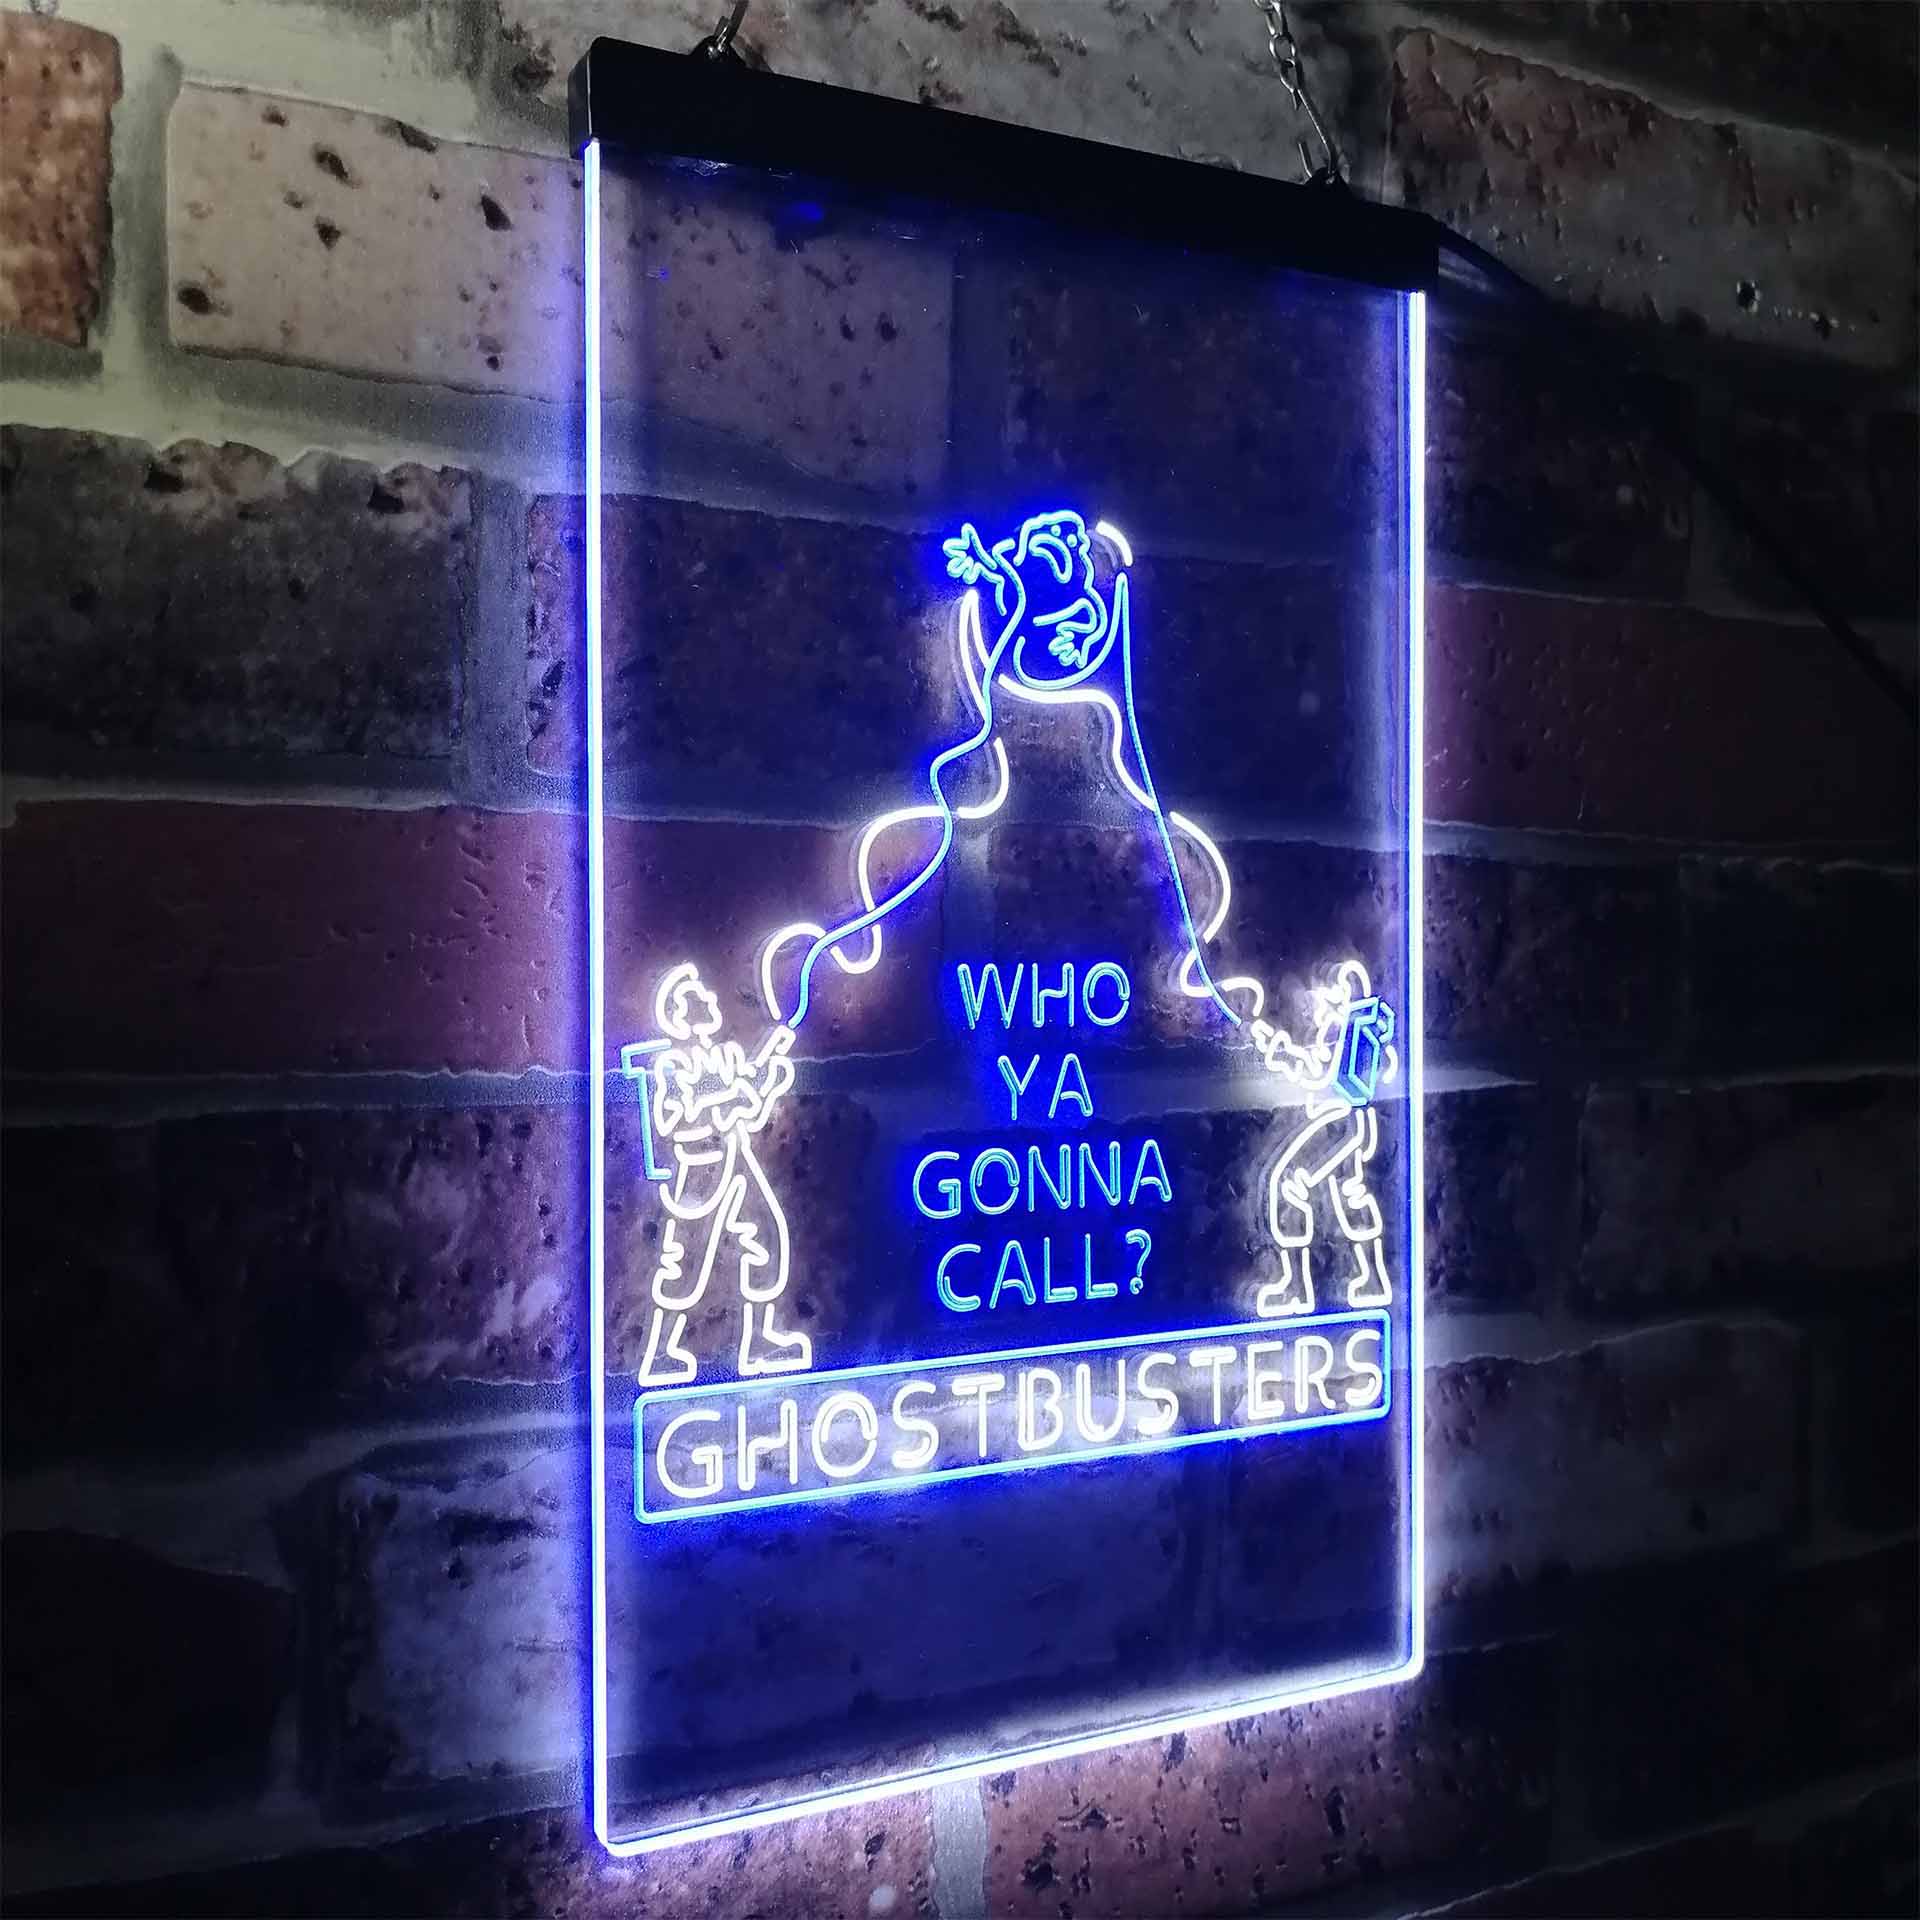 GhostBusters Neon-Like LED Sign - ProLedSign